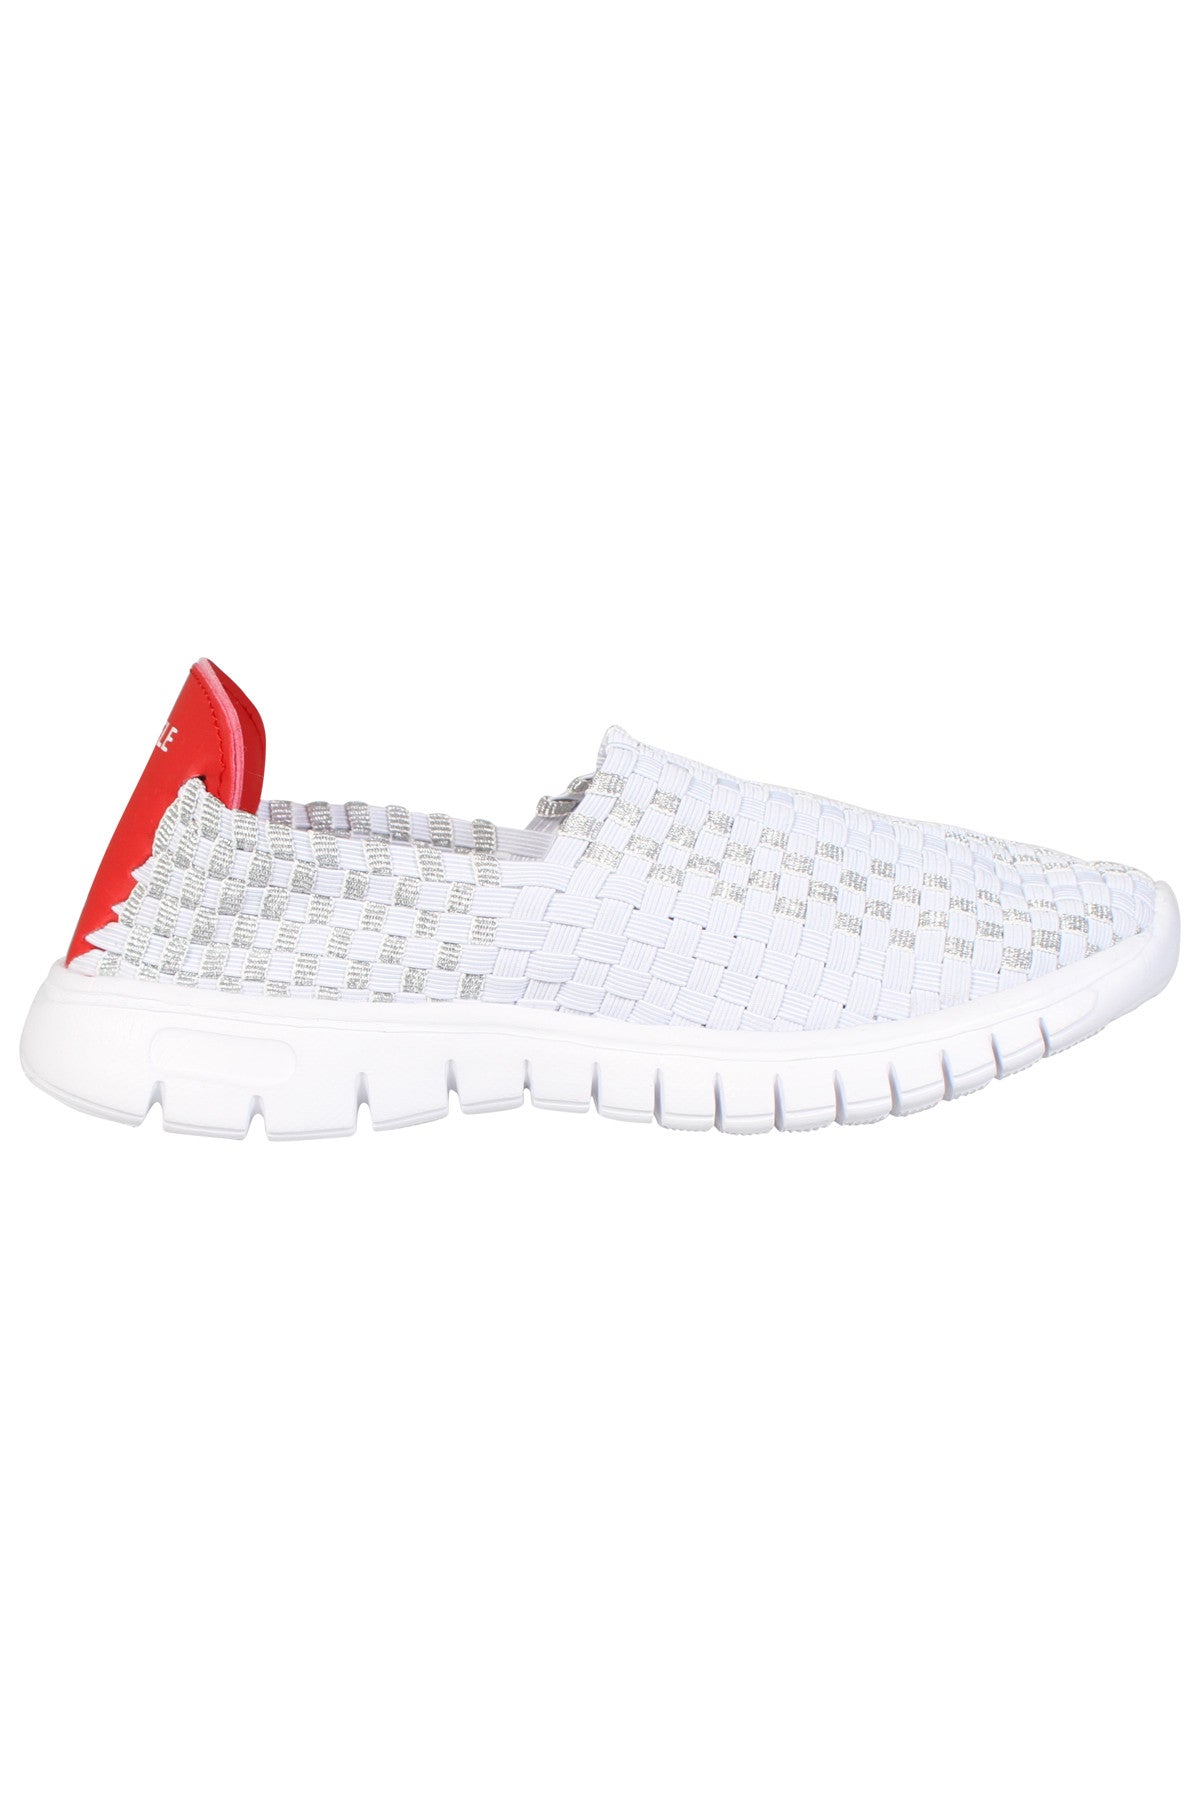 Waffle Pump Womens Casual White Silver Sneakers Comfy Slippers